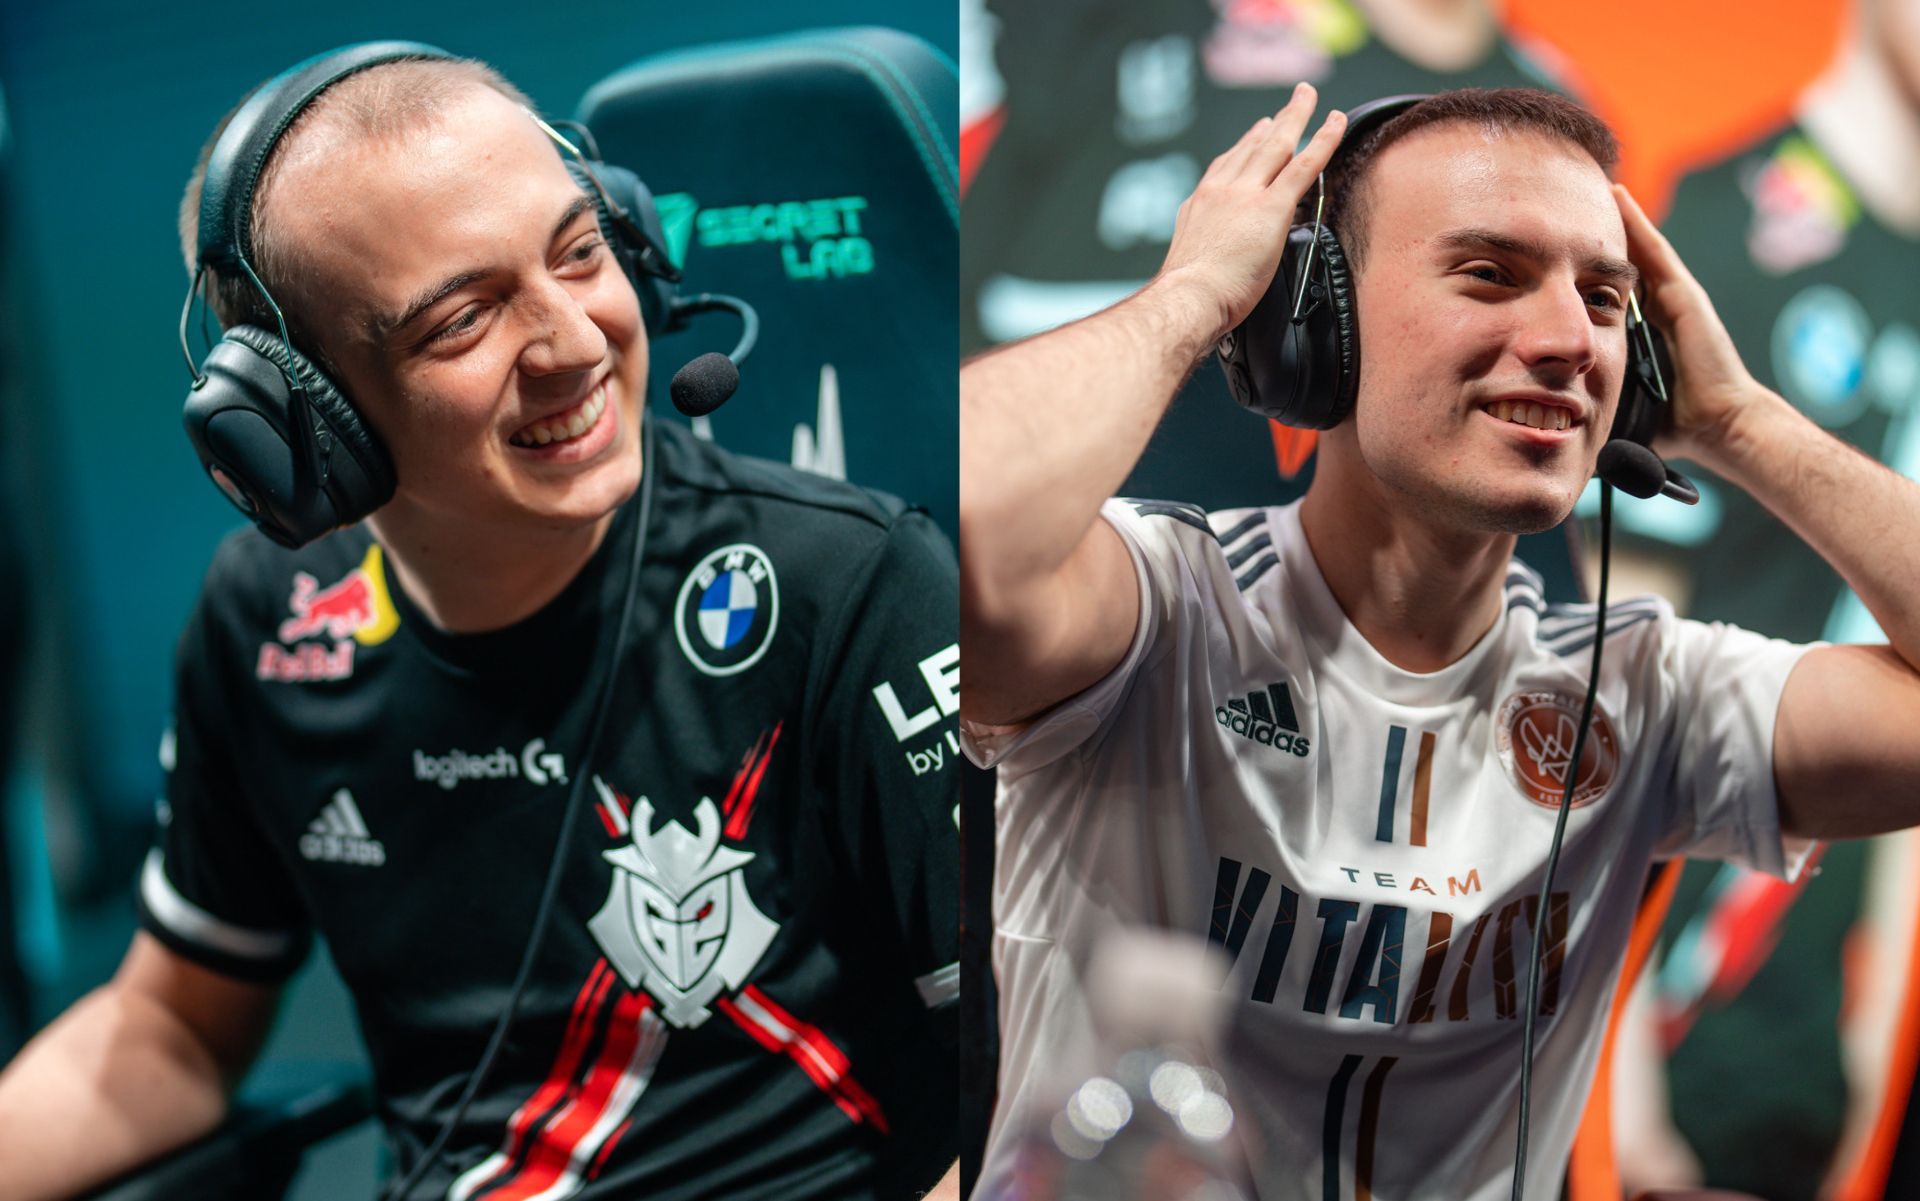 Caps vs Perkz will be the matchup to look for when G2 Esports and Team Vitality clash at League of Legends LEC 2023 Winter Split (Image via Riot Games)